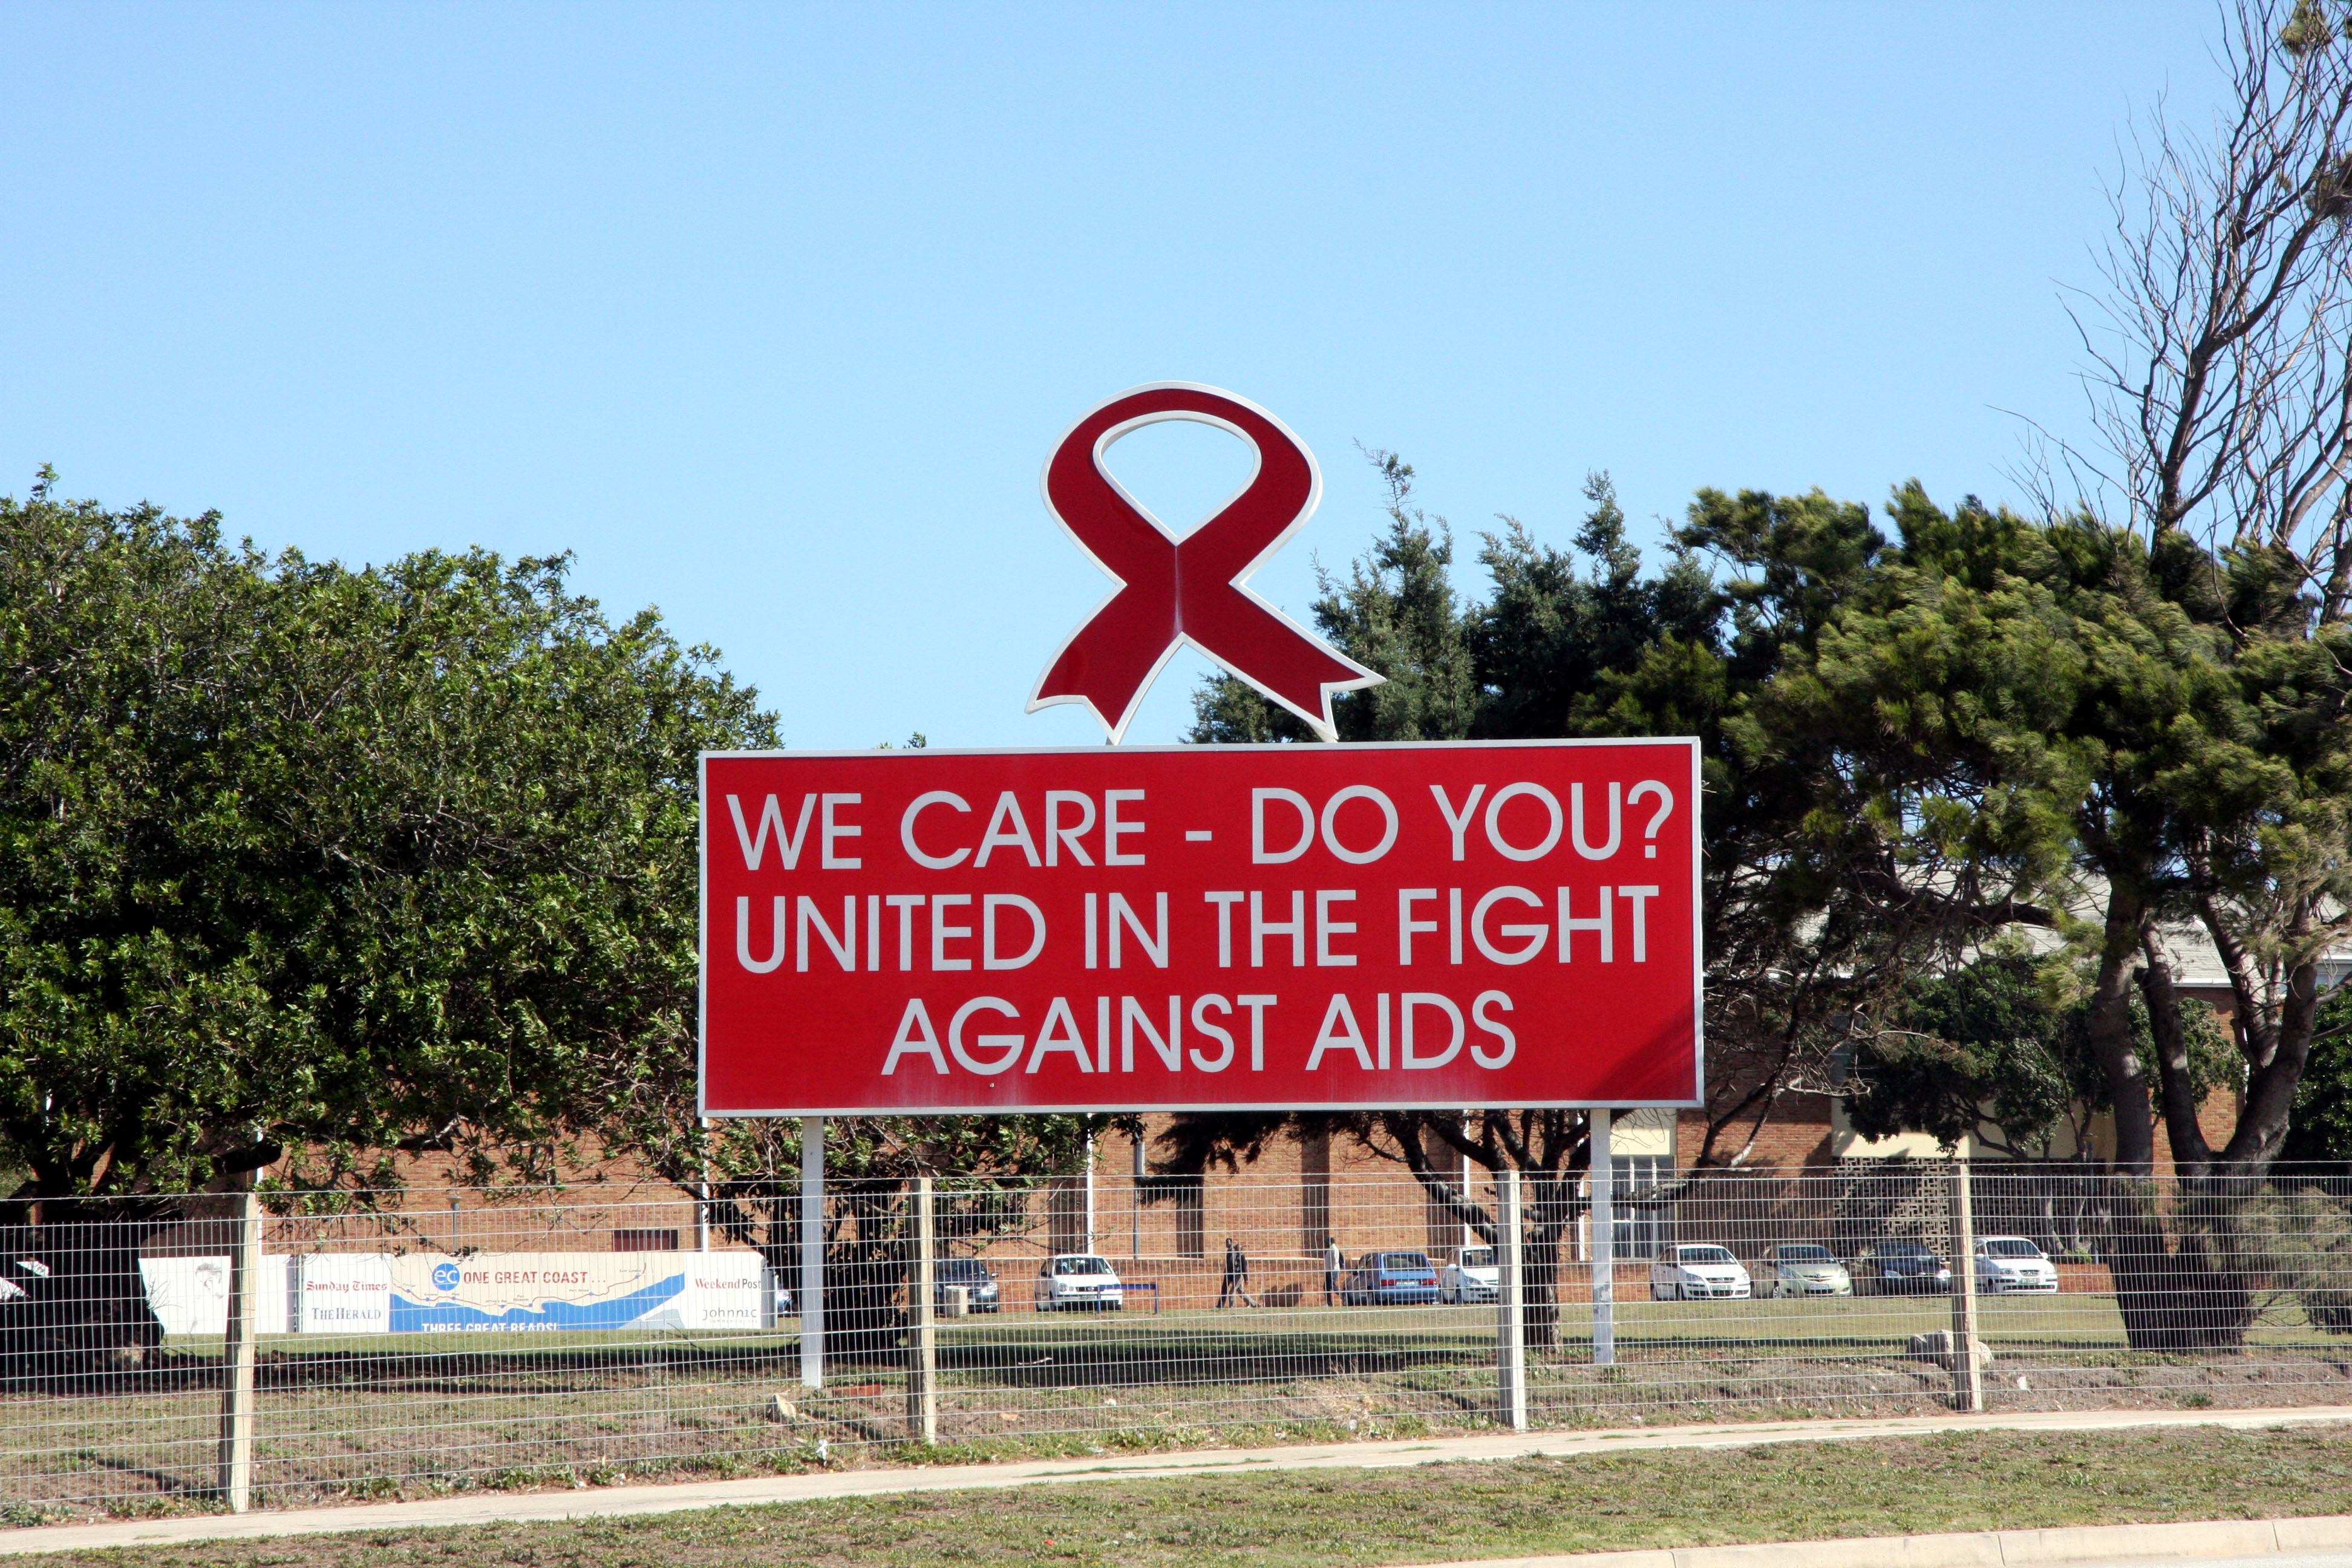 Sign of an AIDS prevention campaign at the Nelson Mandela Metropolitan University in Port Elizabeth, South Africa